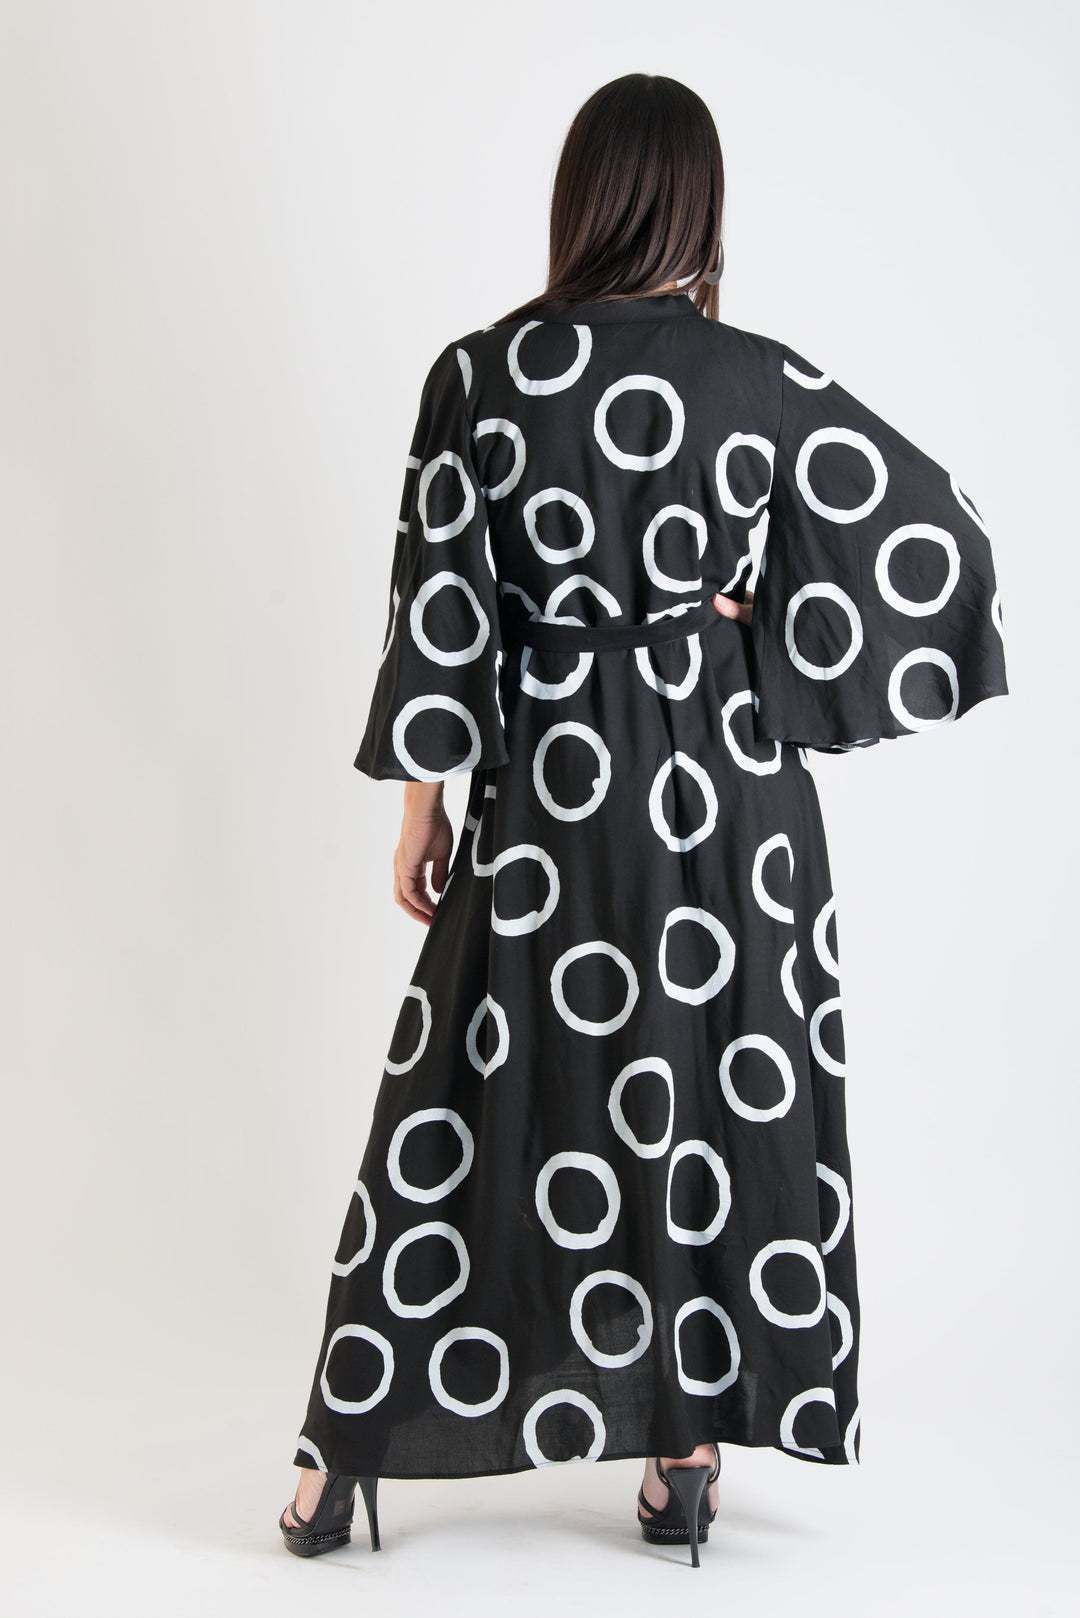 Black and White Dots Long Summer Dress